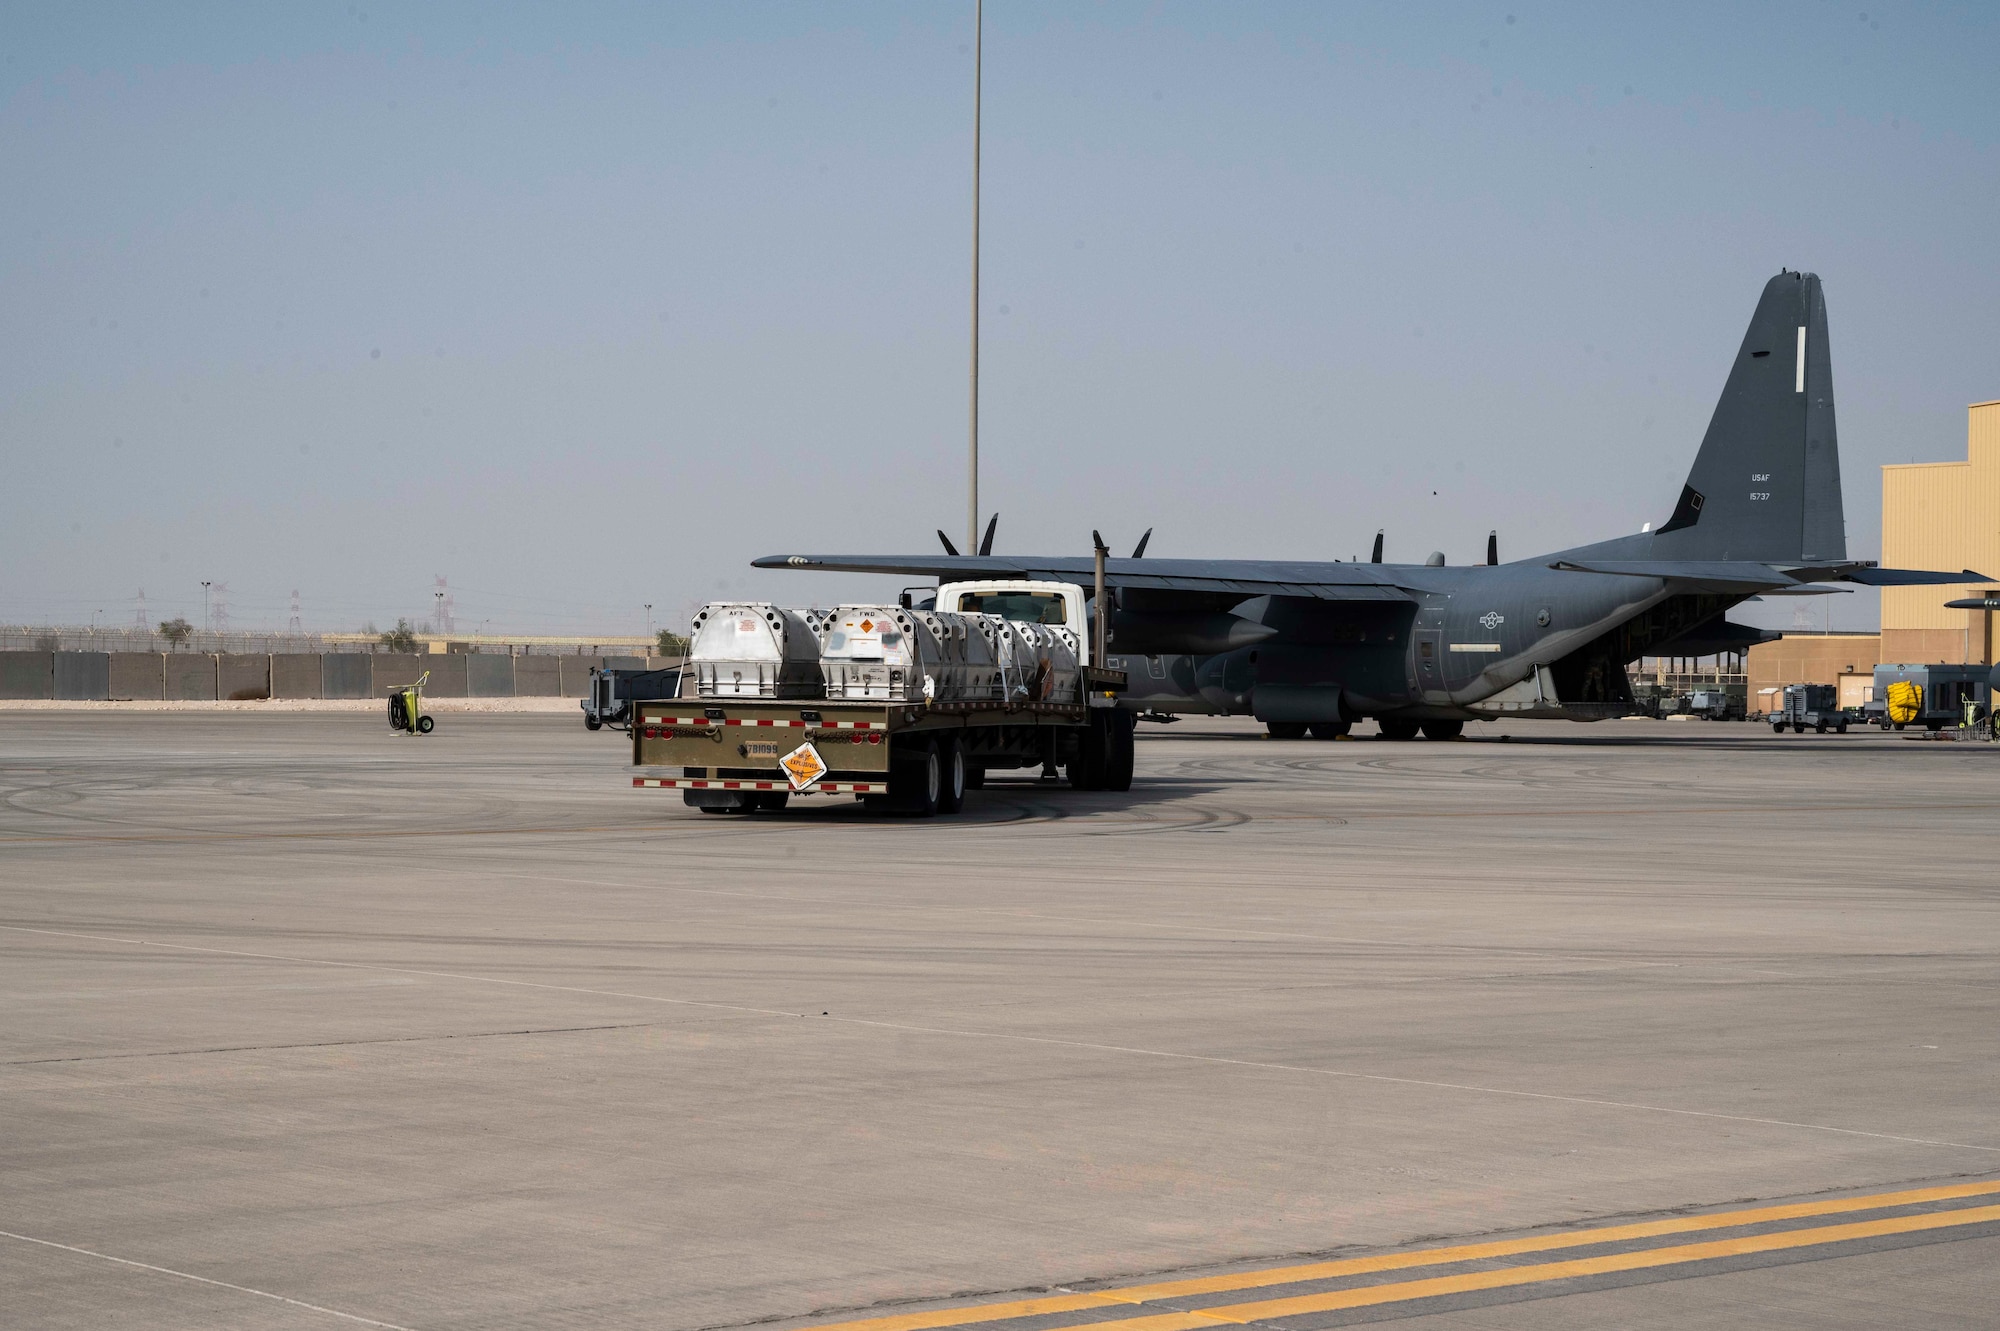 Members of the U.S. Air Force 6th Expeditionary Maintenance Squadron and the 6th Special Operations Tasking Unit stage Joint Air-to-Surface Standoff Missiles (JASSM) next to an MC-130J Commando II at Al Udeid Air Base, Qatar, Aug. 6, 2023. The Rapid Dragon palletized munitions system is capable of deploying long-range cruise missiles using standard airdrop procedures from cargo aircraft like the MC-130J operated by Air Force Special Operations Command. Rapid Dragon is a precision munitions capability for medium-sized or larger cargo aircraft that allows U.S. forces a flexible rapid response option. (U.S. Air Force photo by Staff Sgt. Frank Rohrig)